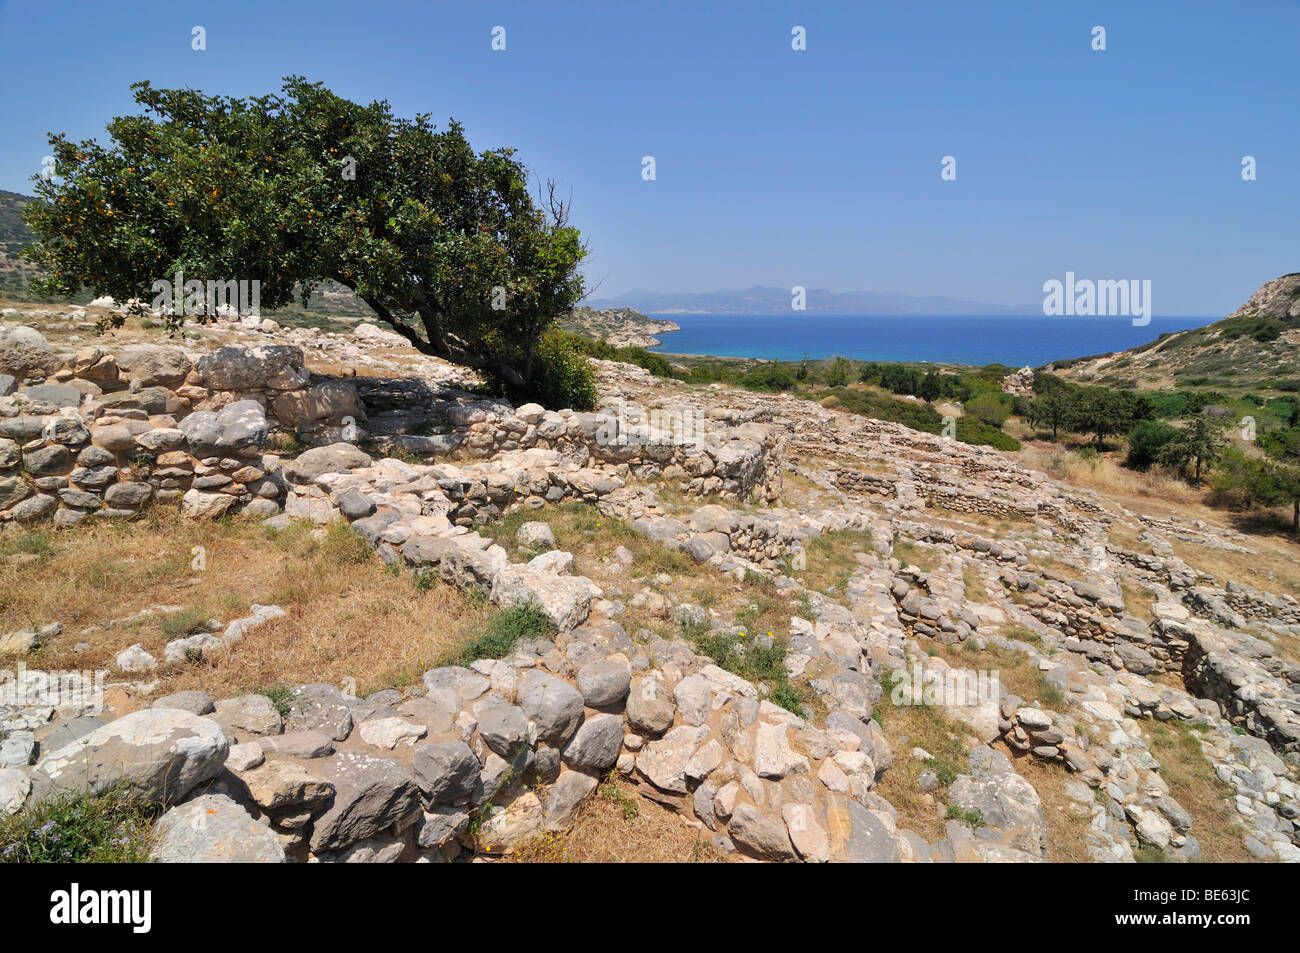 Ancient Ruins of Gournia, historic Minoan settlement now used as an archaeological site, Eastern Crete, Crete, Greece, Europe Stock Photo